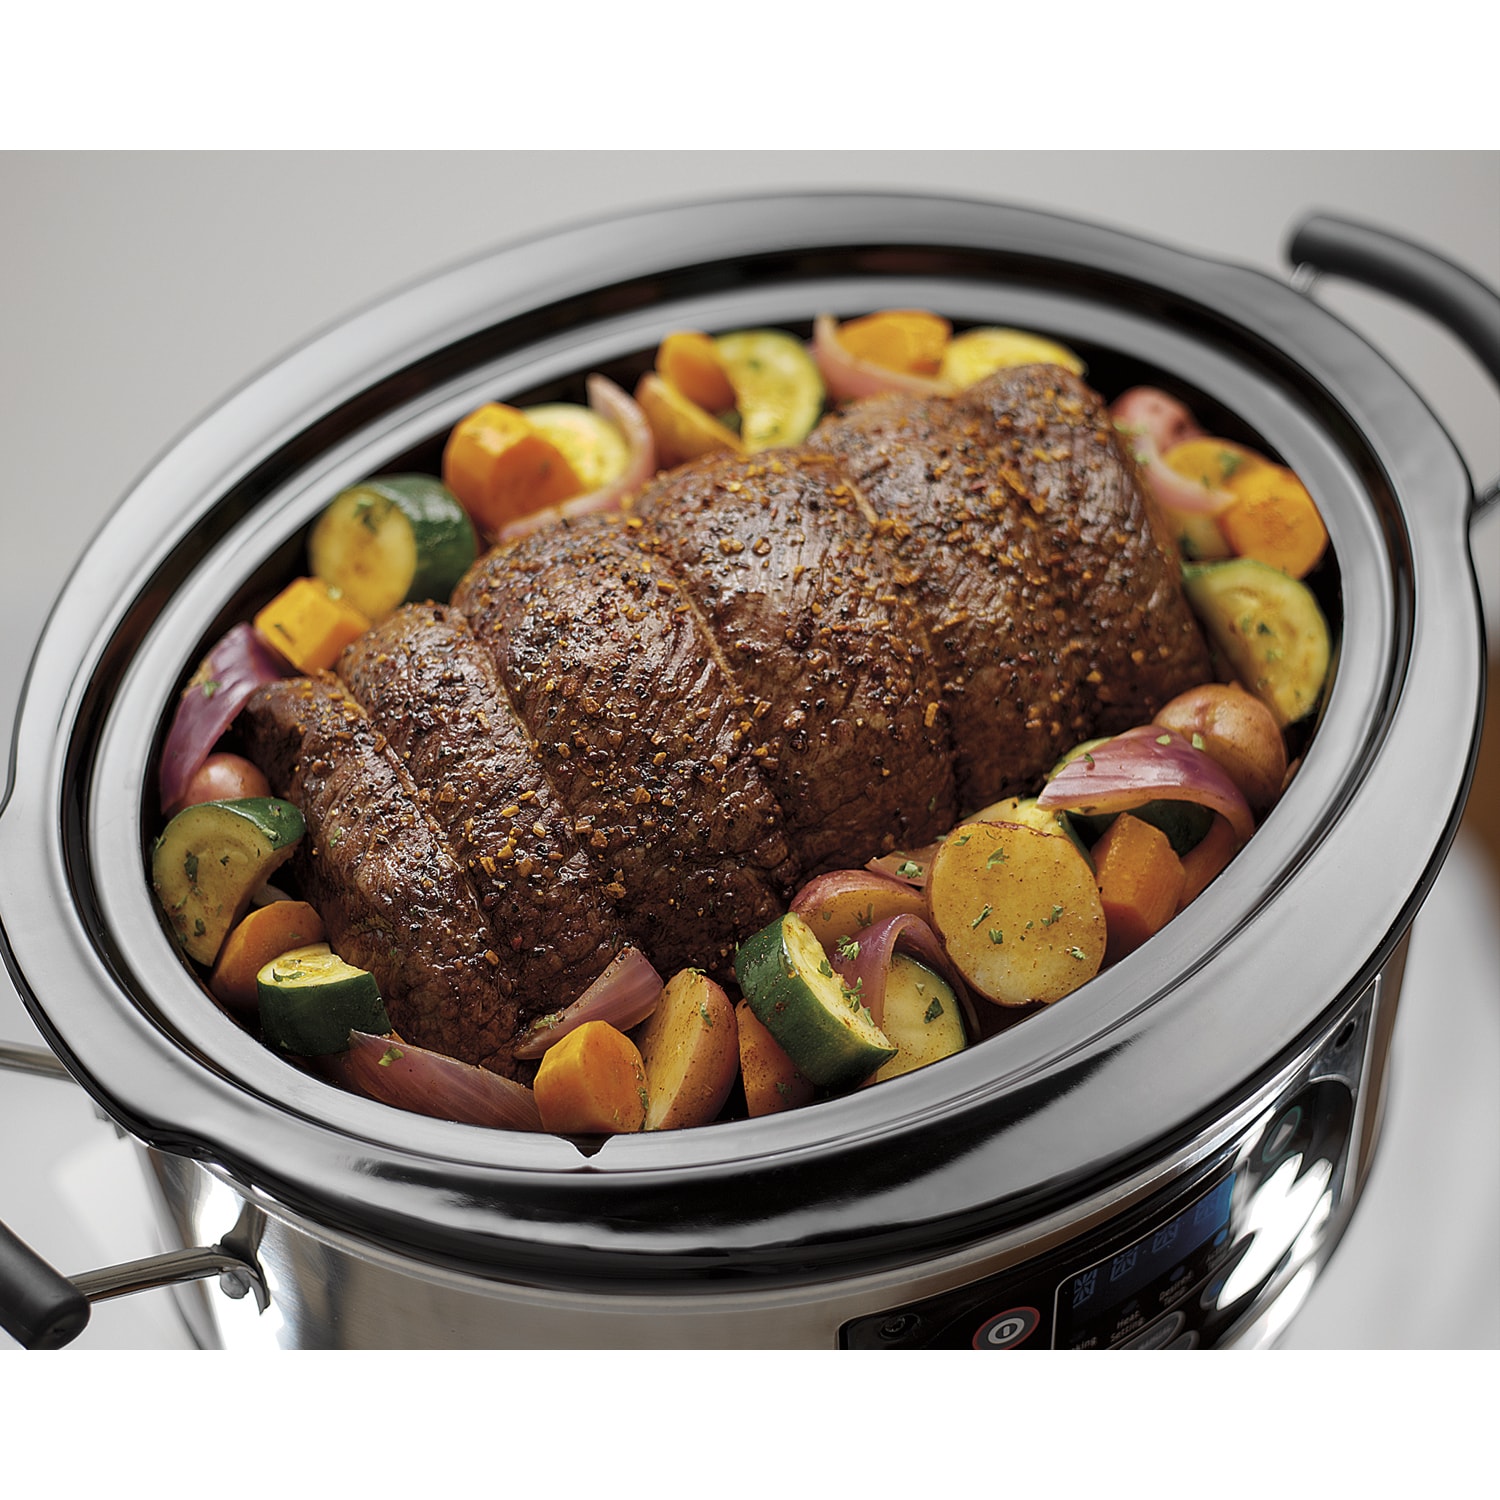 Hamilton Beach Stainless Steel Set 'n Forget Programmable 6-quart Slow  Cooker - Stainless Steel - On Sale - Bed Bath & Beyond - 4471948